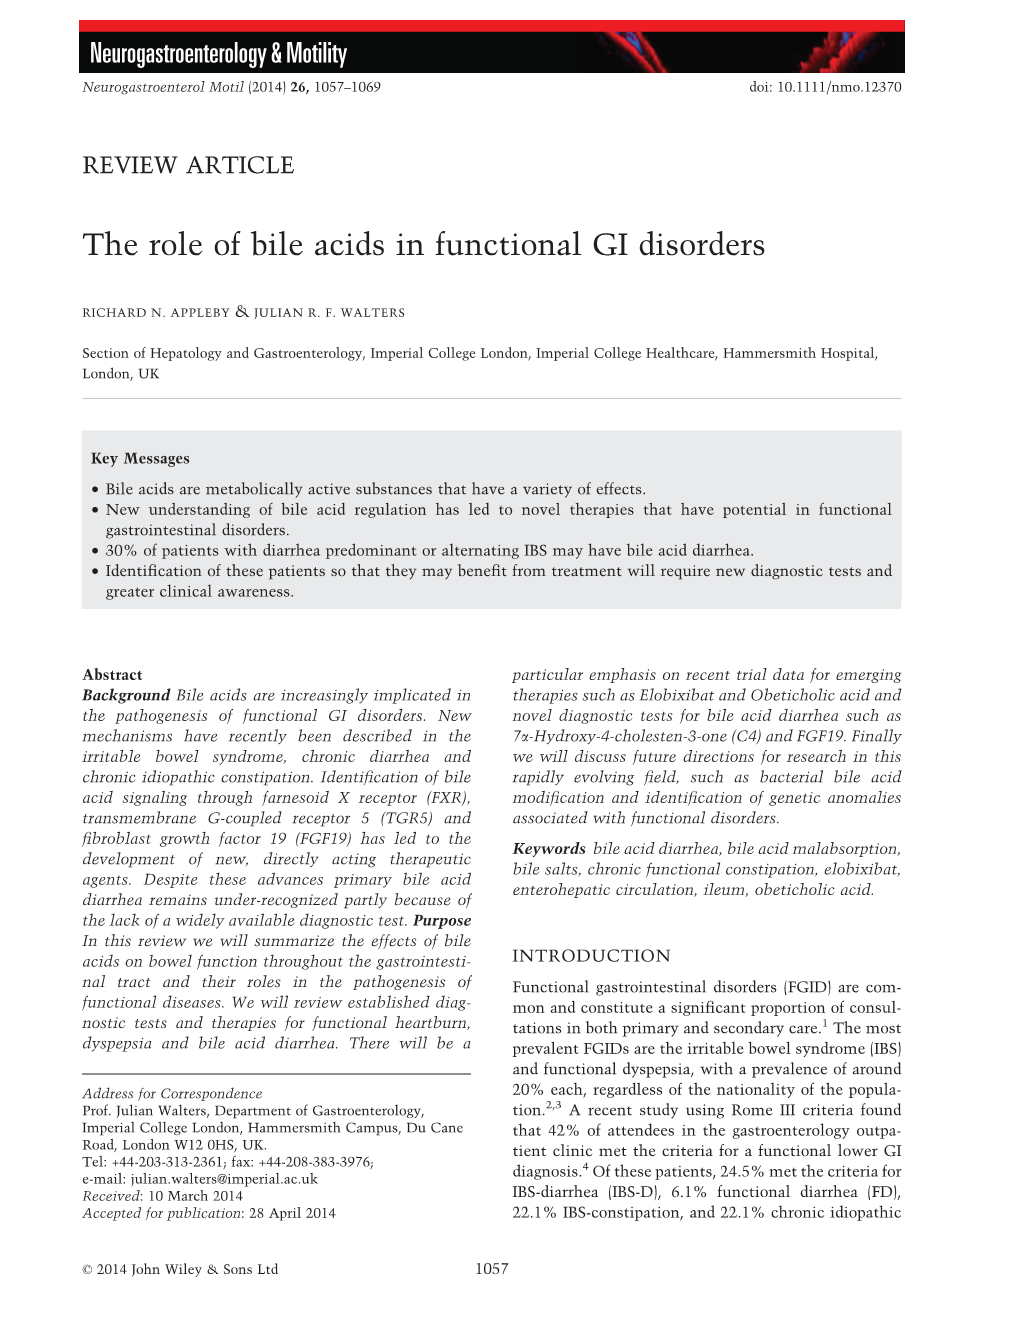 The Role of Bile Acids in Functional GI Disorders